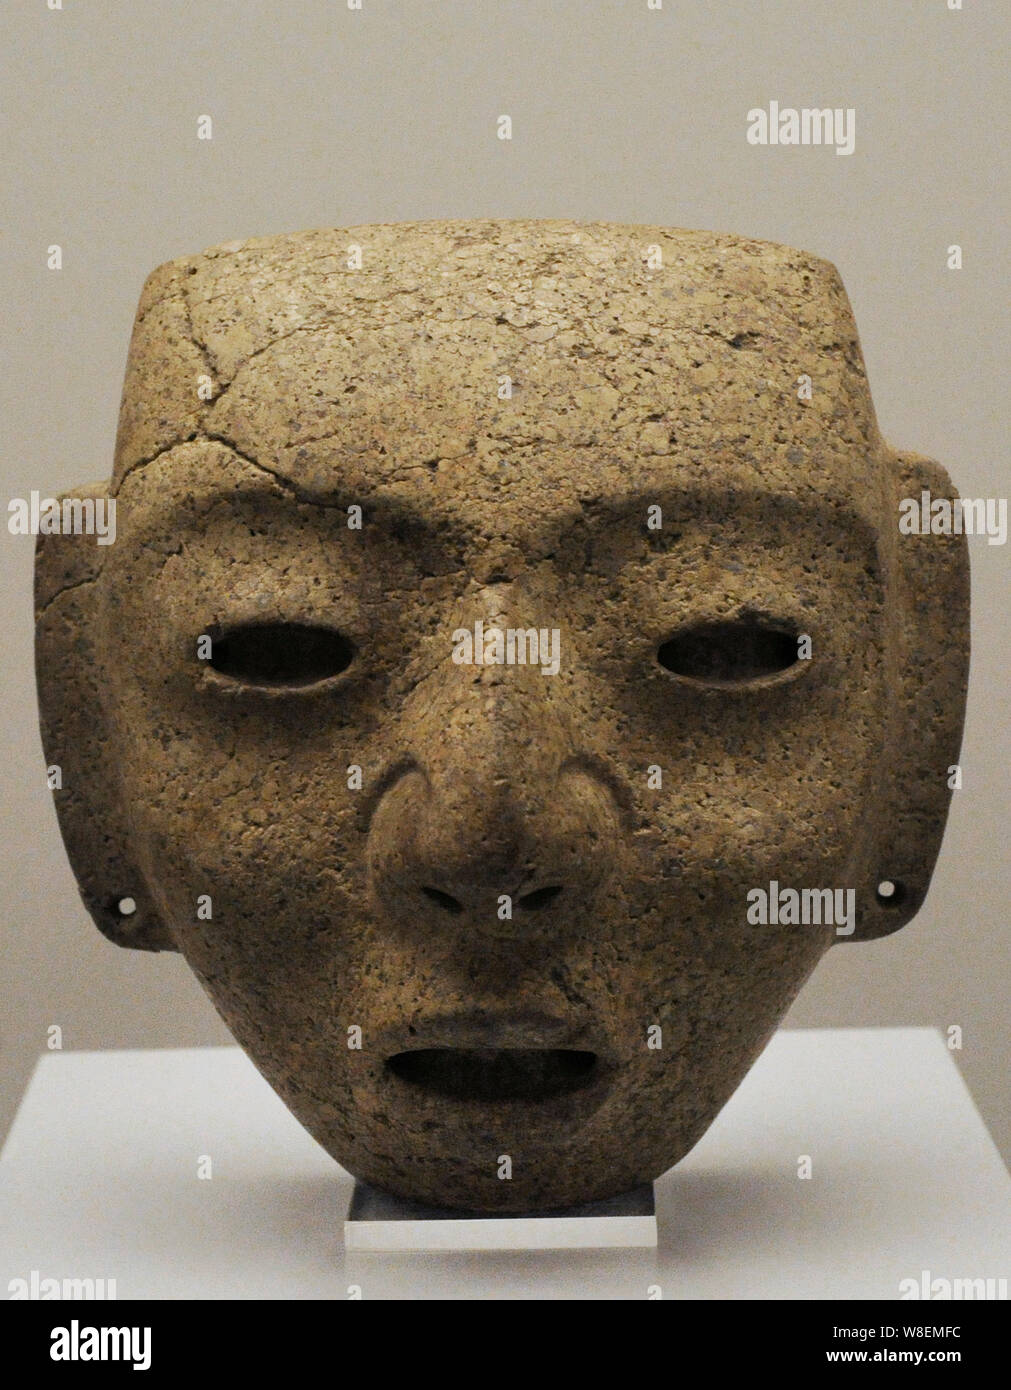 Mask depicting a human face. Stone. Teotihuacan III-IV. Xolalpan Phase. Middle Classic Period (400-700 AD). Central Mexico. Museum of the Americas. Madrid, Spain. Stock Photo